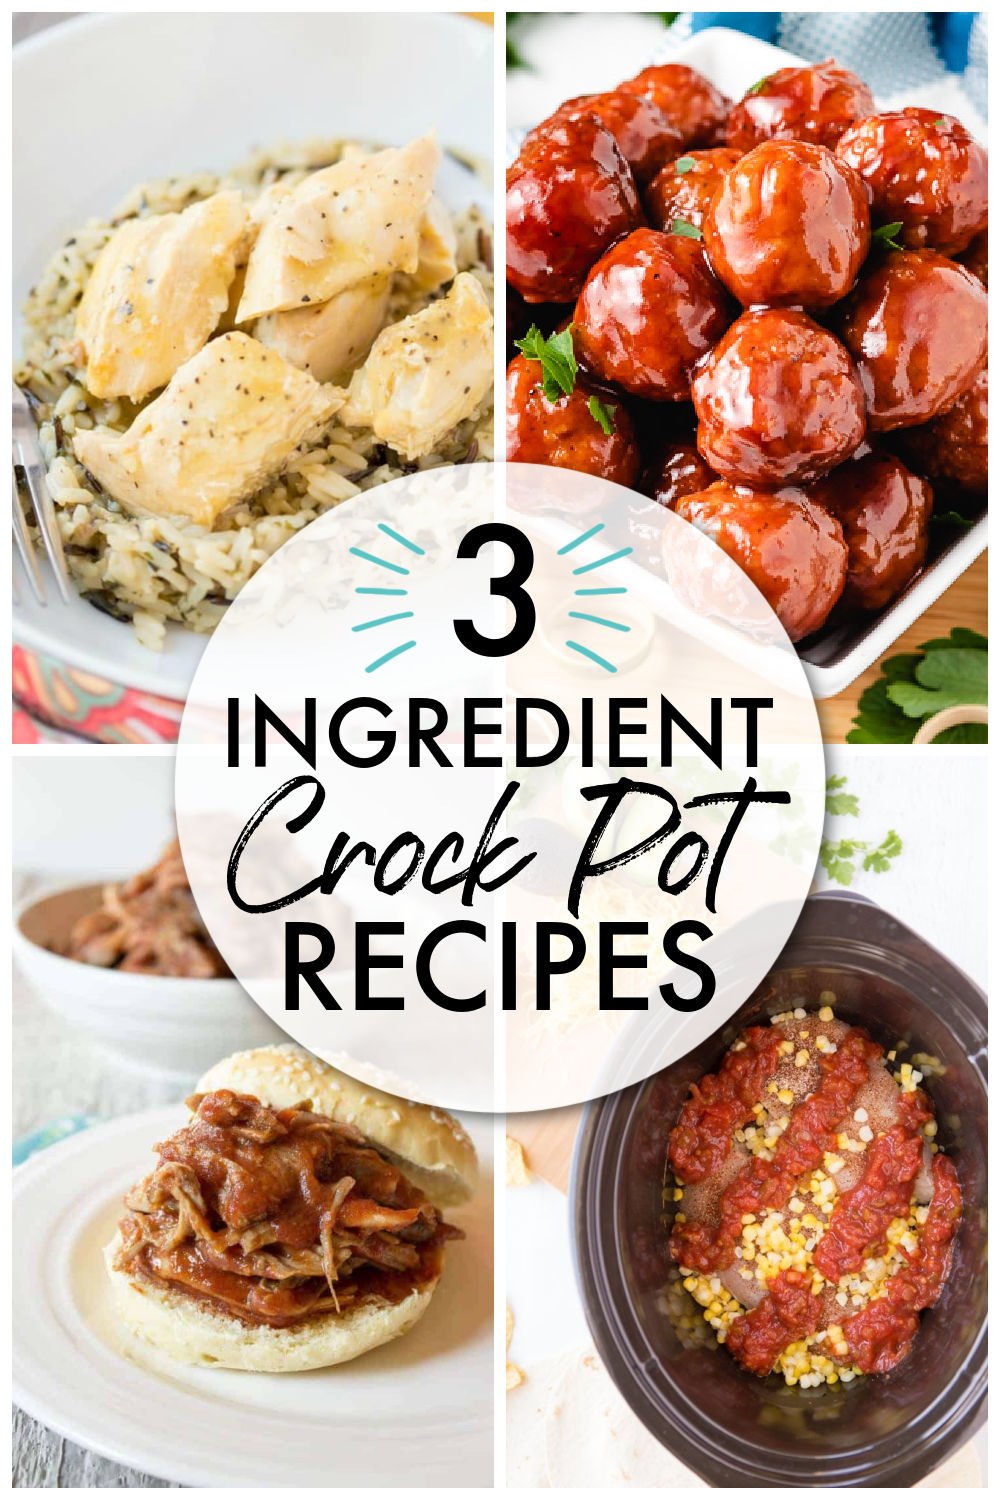 I have gathered up some of the most delicious 3 ingredient crock pot recipes for you to whip up without much effort at all. | www.persnicketyplates.com